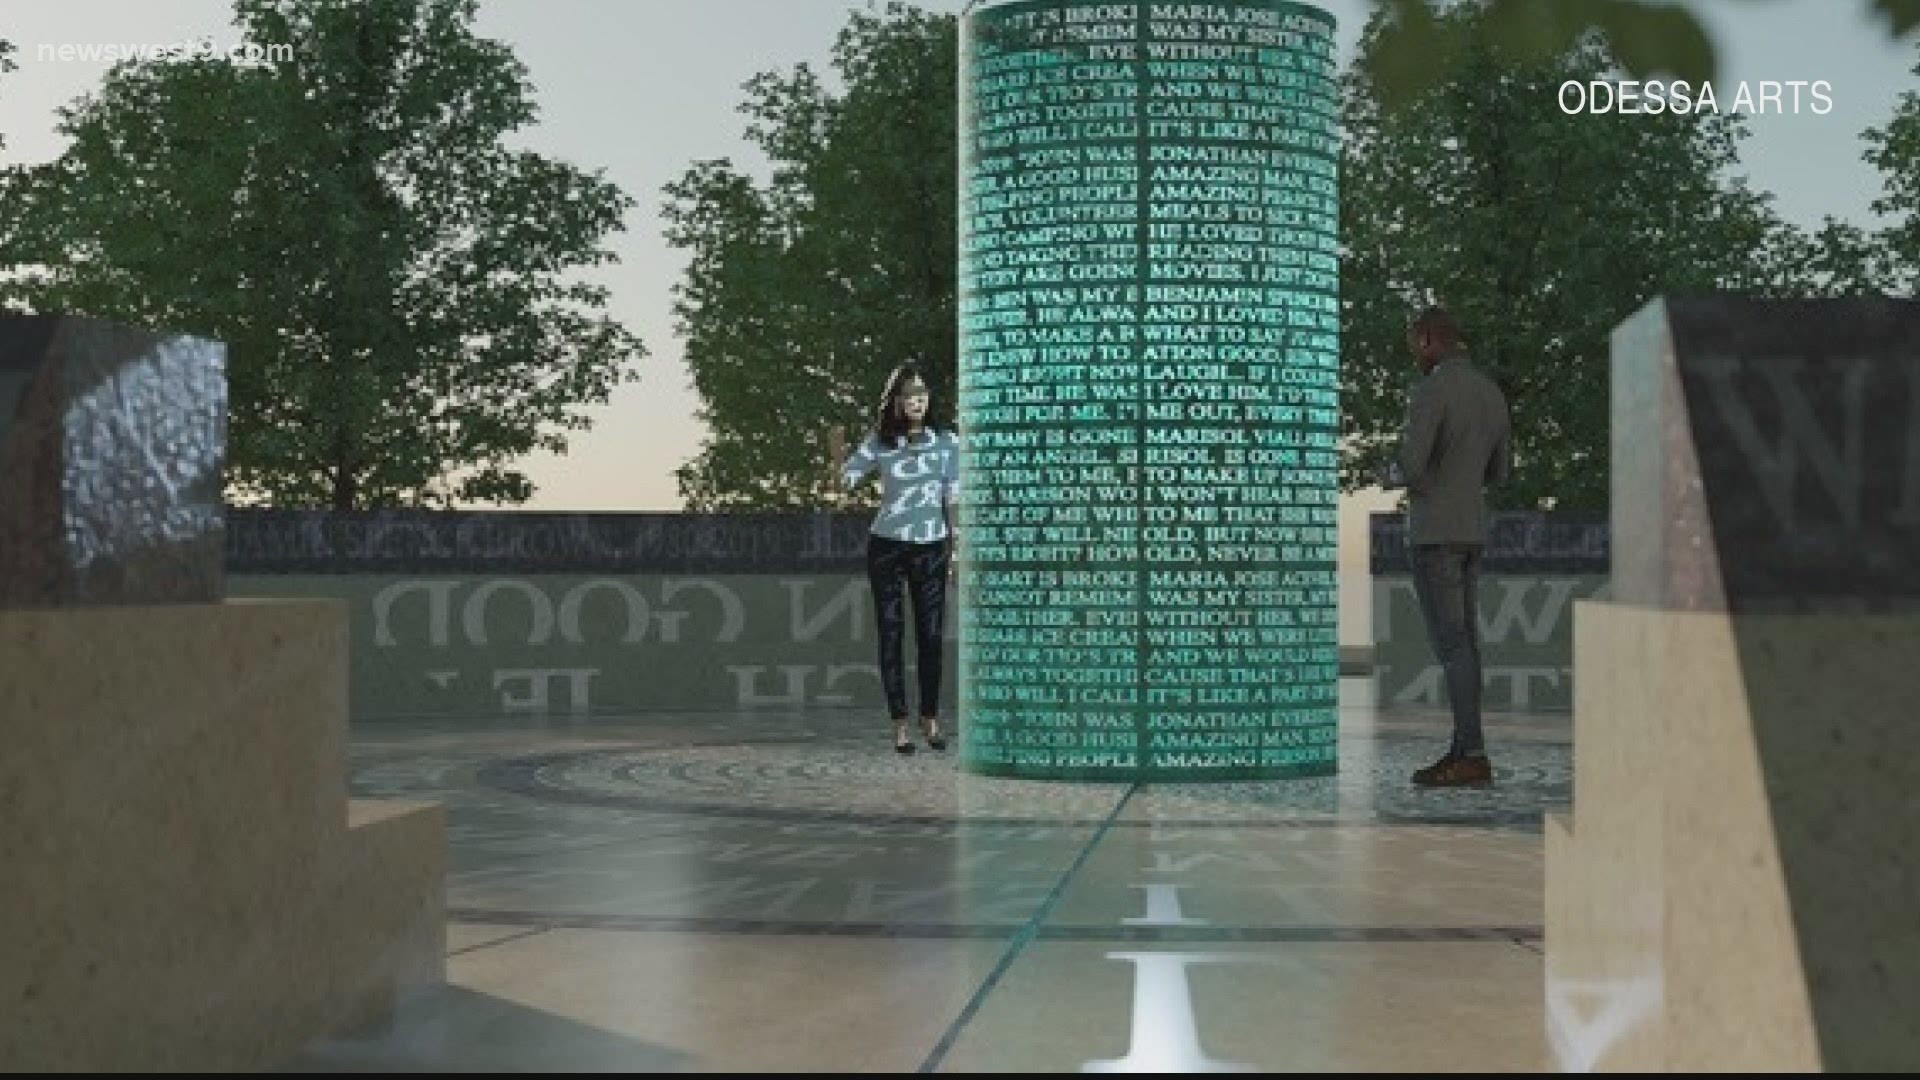 UTPB is partnering with Odessa Arts to build a memorial honoring the victims of the 2019 mass shooting. Right now, they're waiting on clearance from the city.